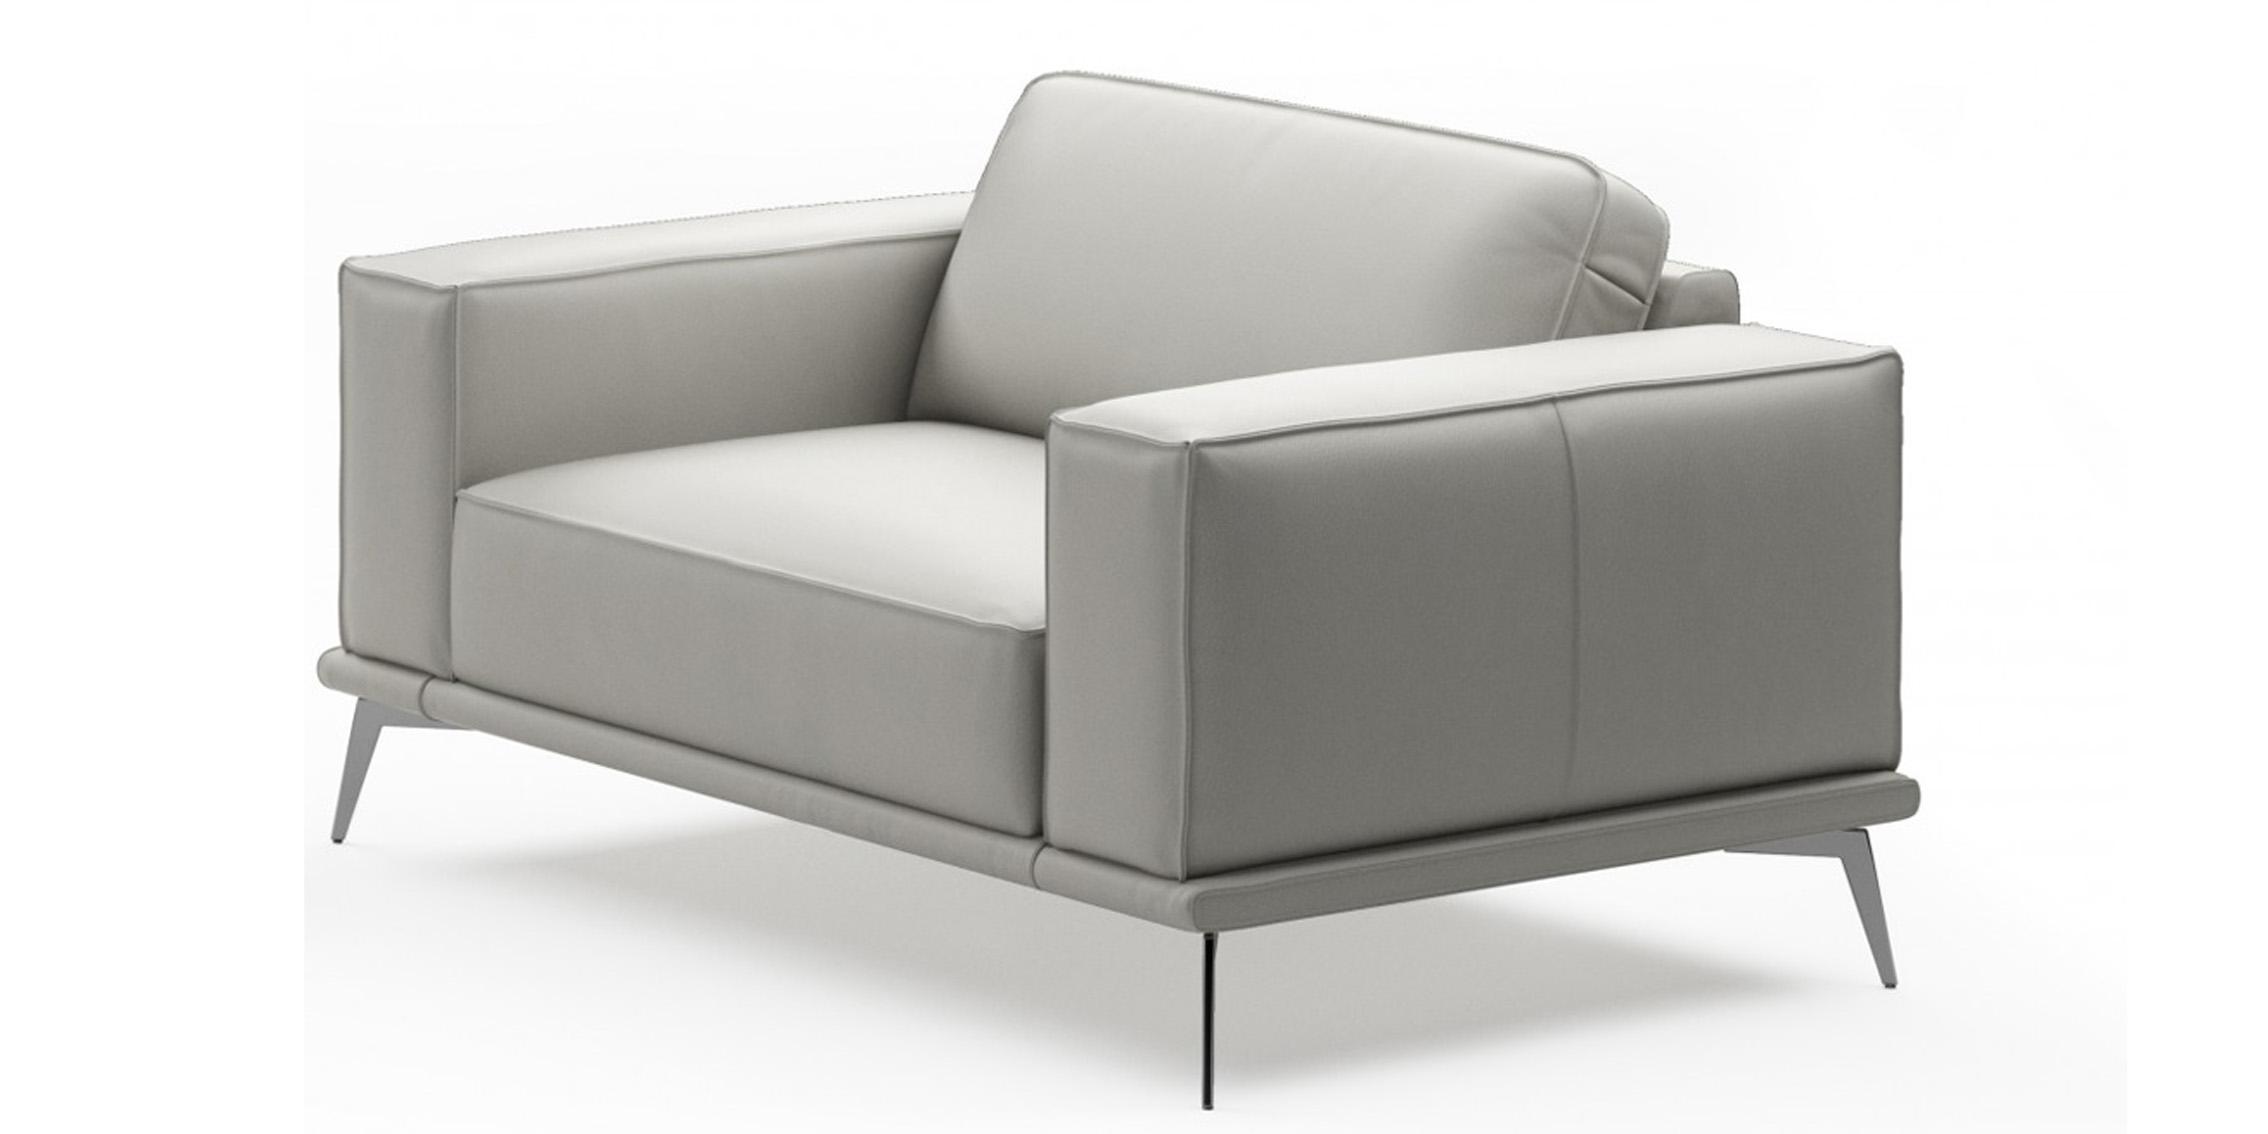 Contemporary, Modern Arm Chair VGCCSOHO-GRY-CH VGCCSOHO-GRY-CH in Light Grey Italian Leather